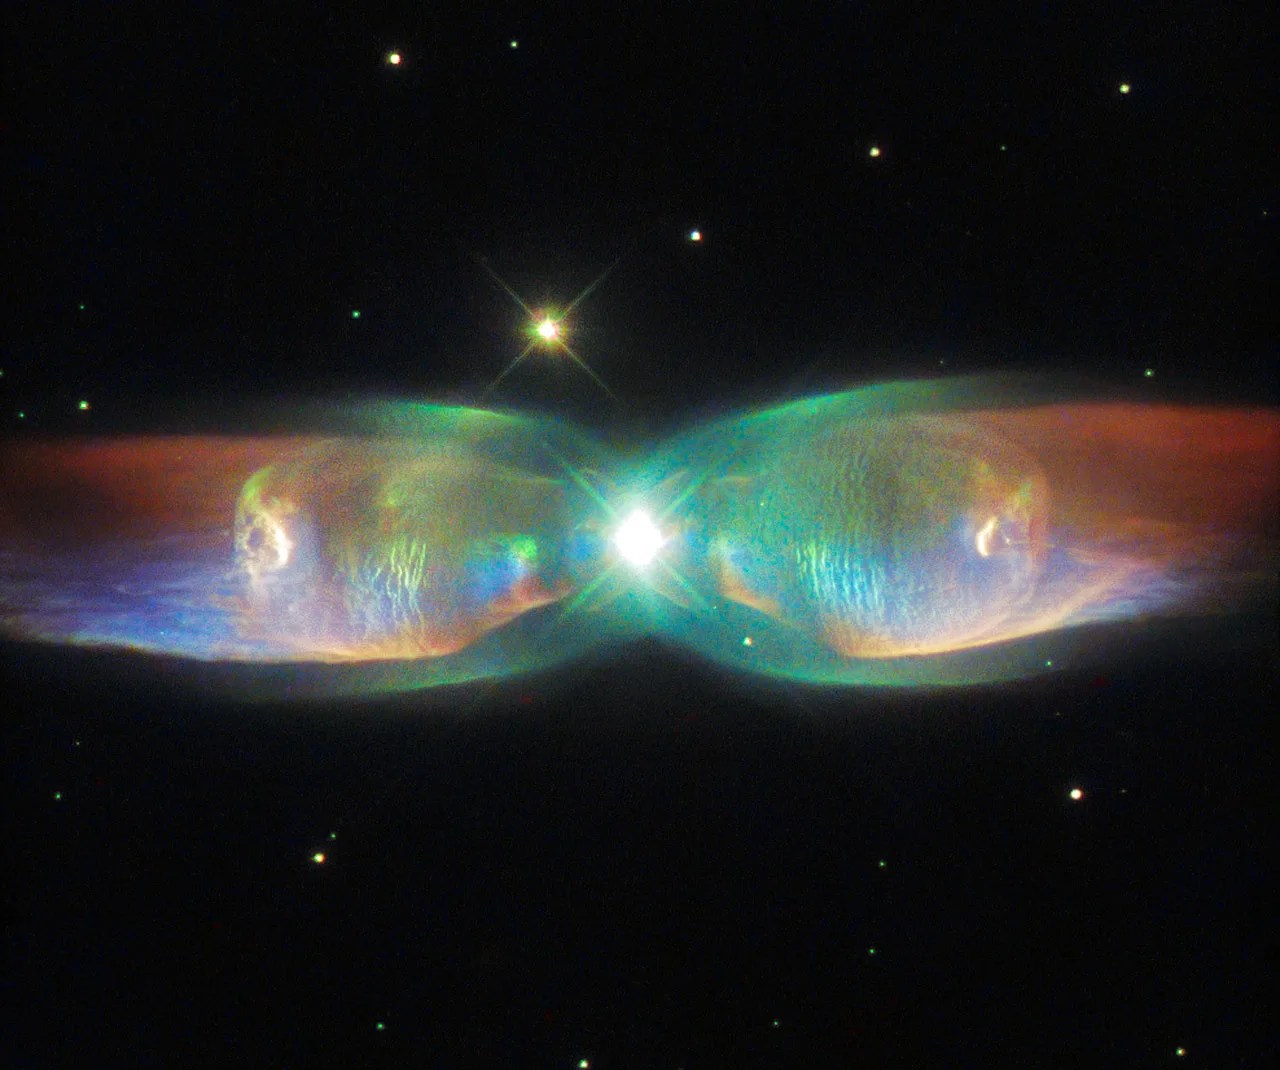 A double-lobed nebula with lobes extending east to west in shimmering colors of green, red and blue. Ripples and waves are visible in the lobes. A bright white light emanates fron the center of the nebula, between the two lobes, where the binary star system is located.